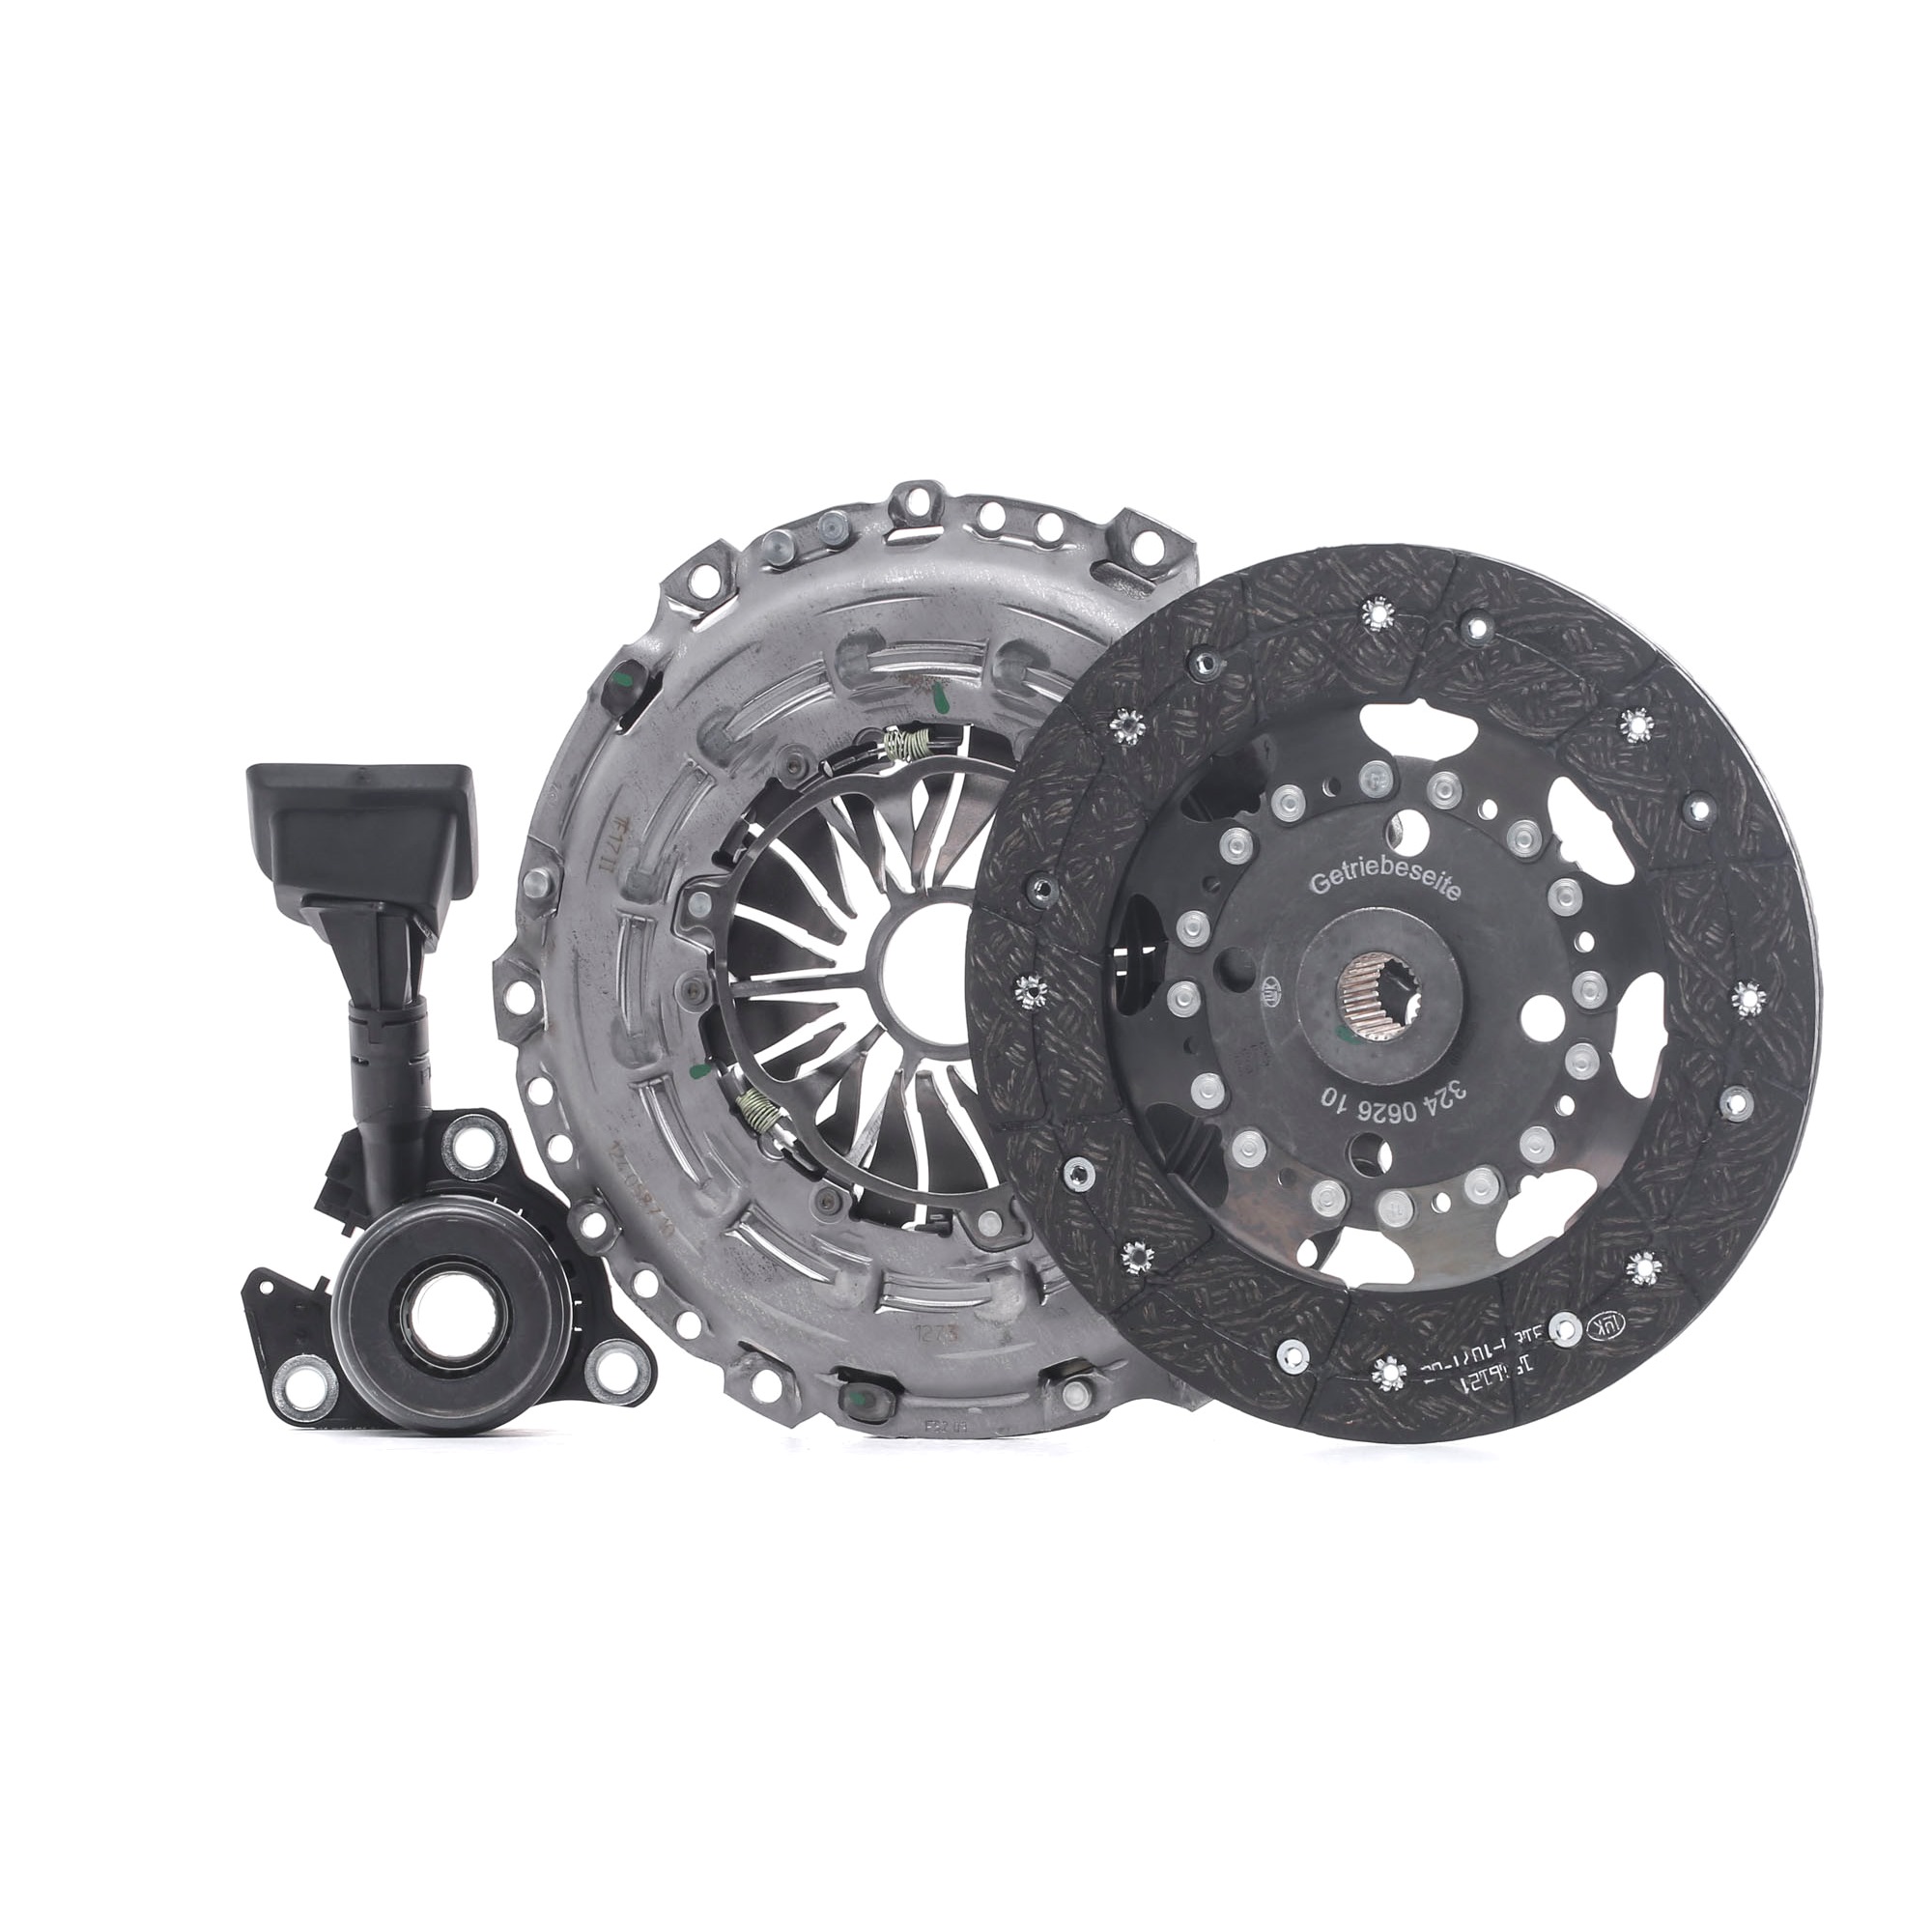 LuK for engines with dual-mass flywheel, with central slave cylinder, Requires special tools for mounting, Check and replace dual-mass flywheel if necessary., with automatic adjustment, 240mm Ø: 240mm Clutch replacement kit 624 3527 33 buy